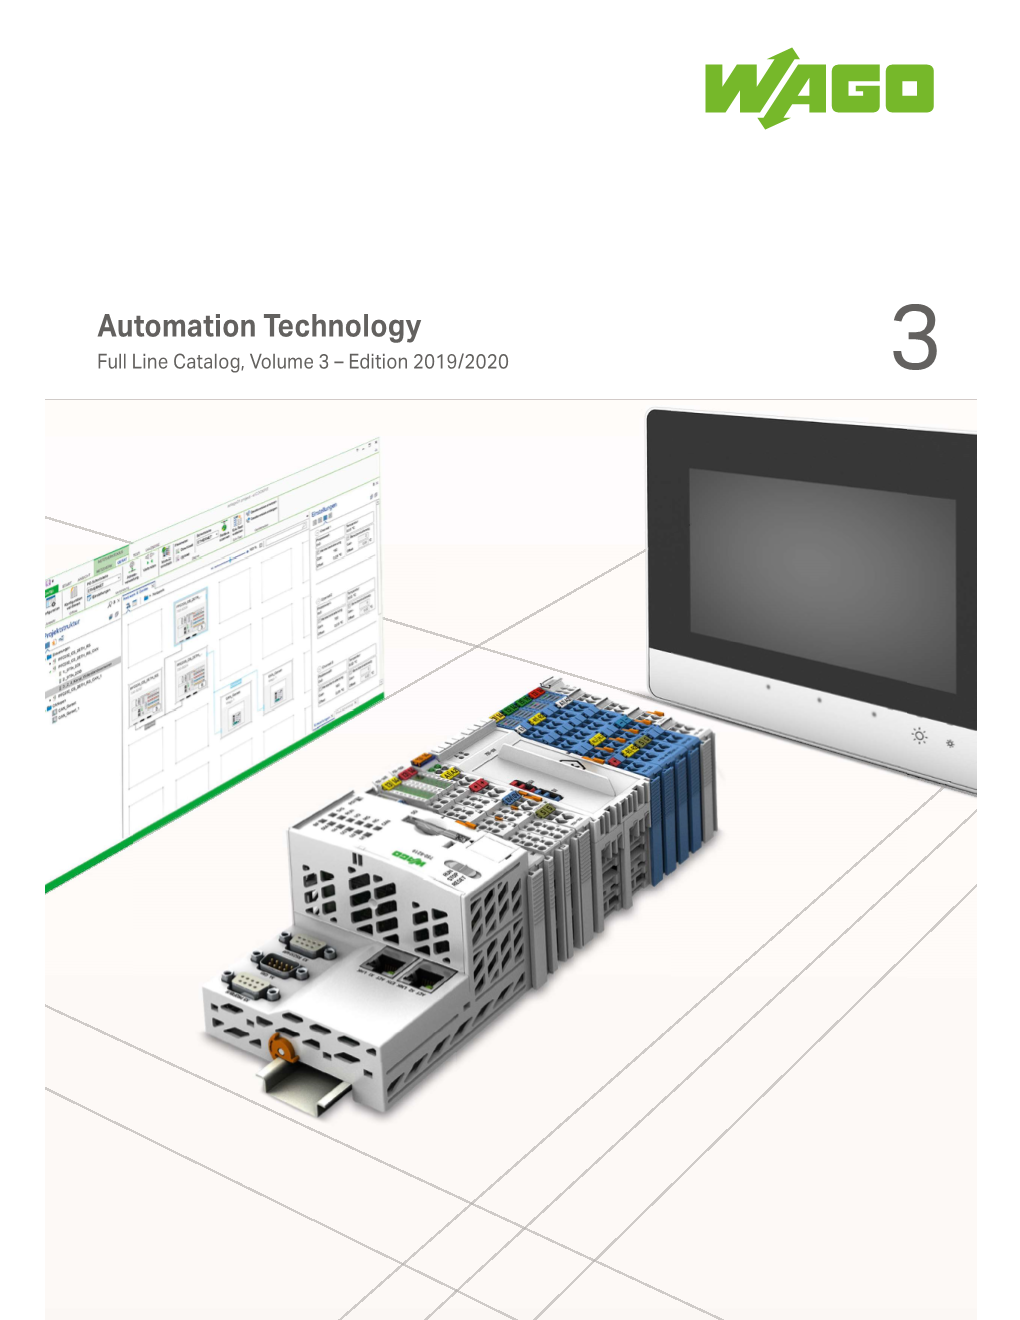 Automation Technology Full Line Catalog, Volume 3 – Edition 2019/2020 3 Operation and Monitoring